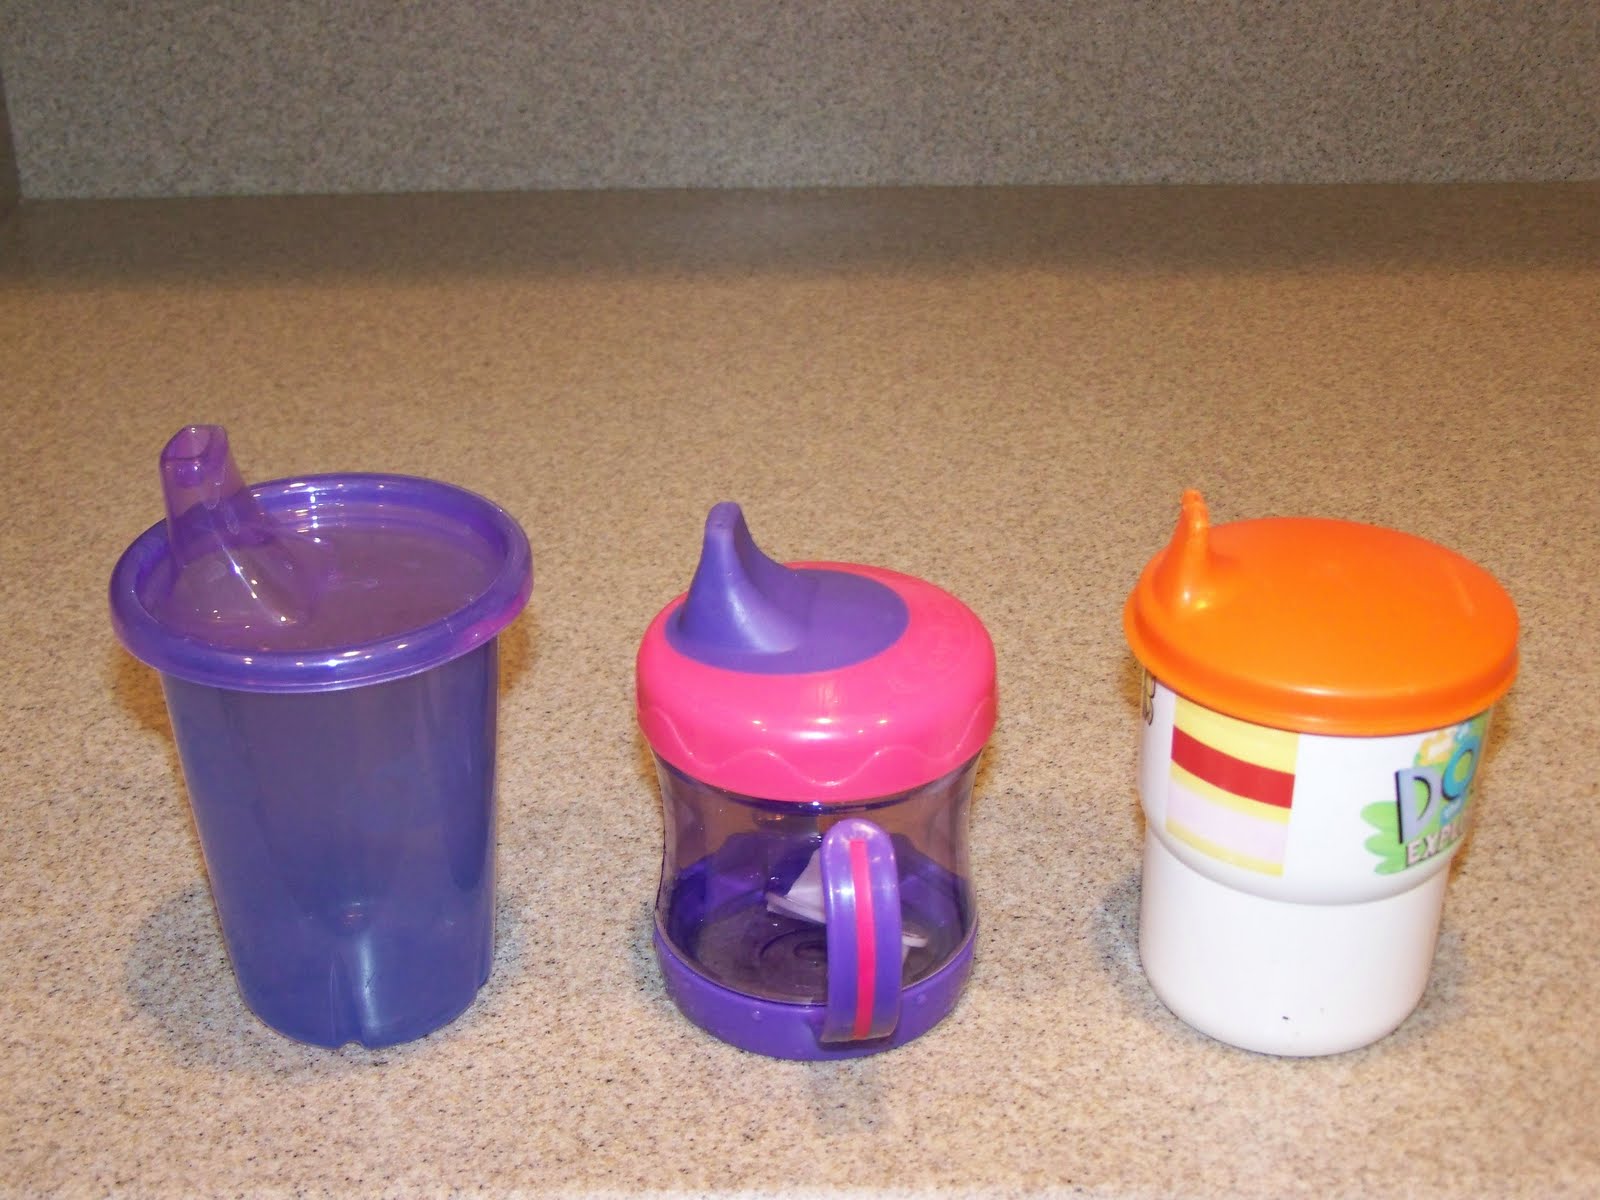 3 kids and lots of pigs: welcome to my pig pen: The Sippy Cup Wars